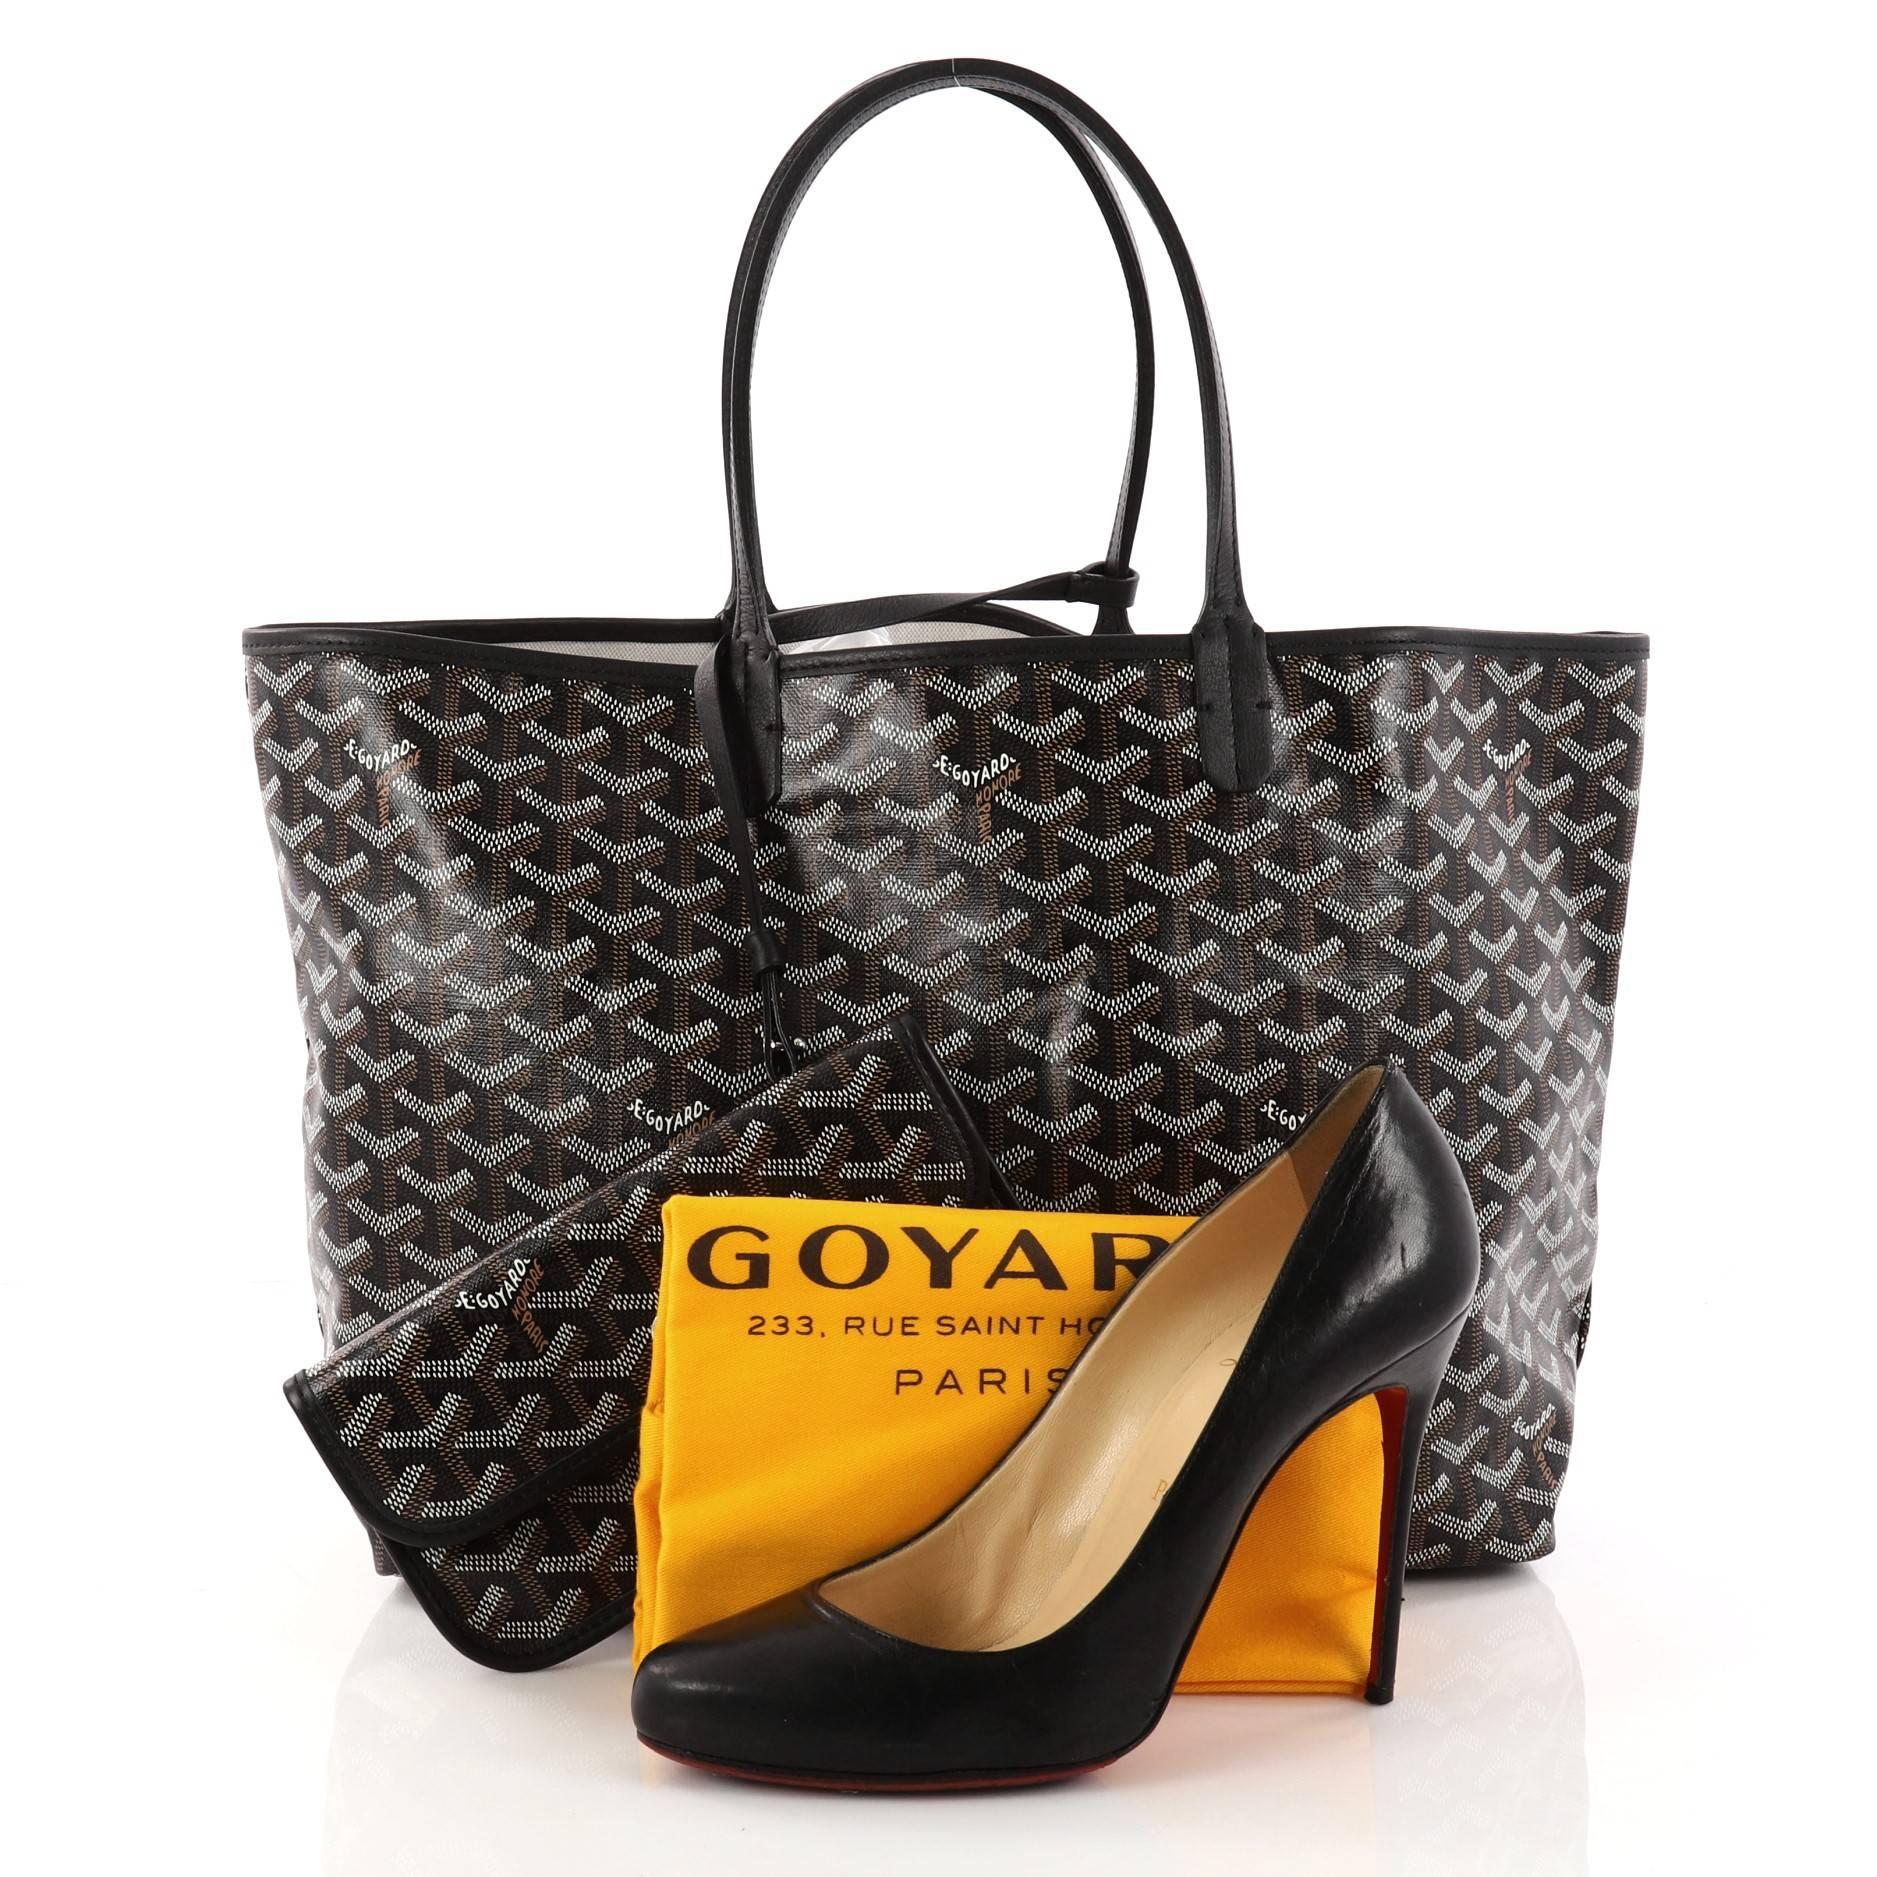 This authentic Goyard St. Louis Tote Coated Canvas PM is an ideal bag for everyday excursions. Crafted from popular and traditional black, brown, and white Goyard chevron coated canvas, this spacious tote features long thin leather handles, black